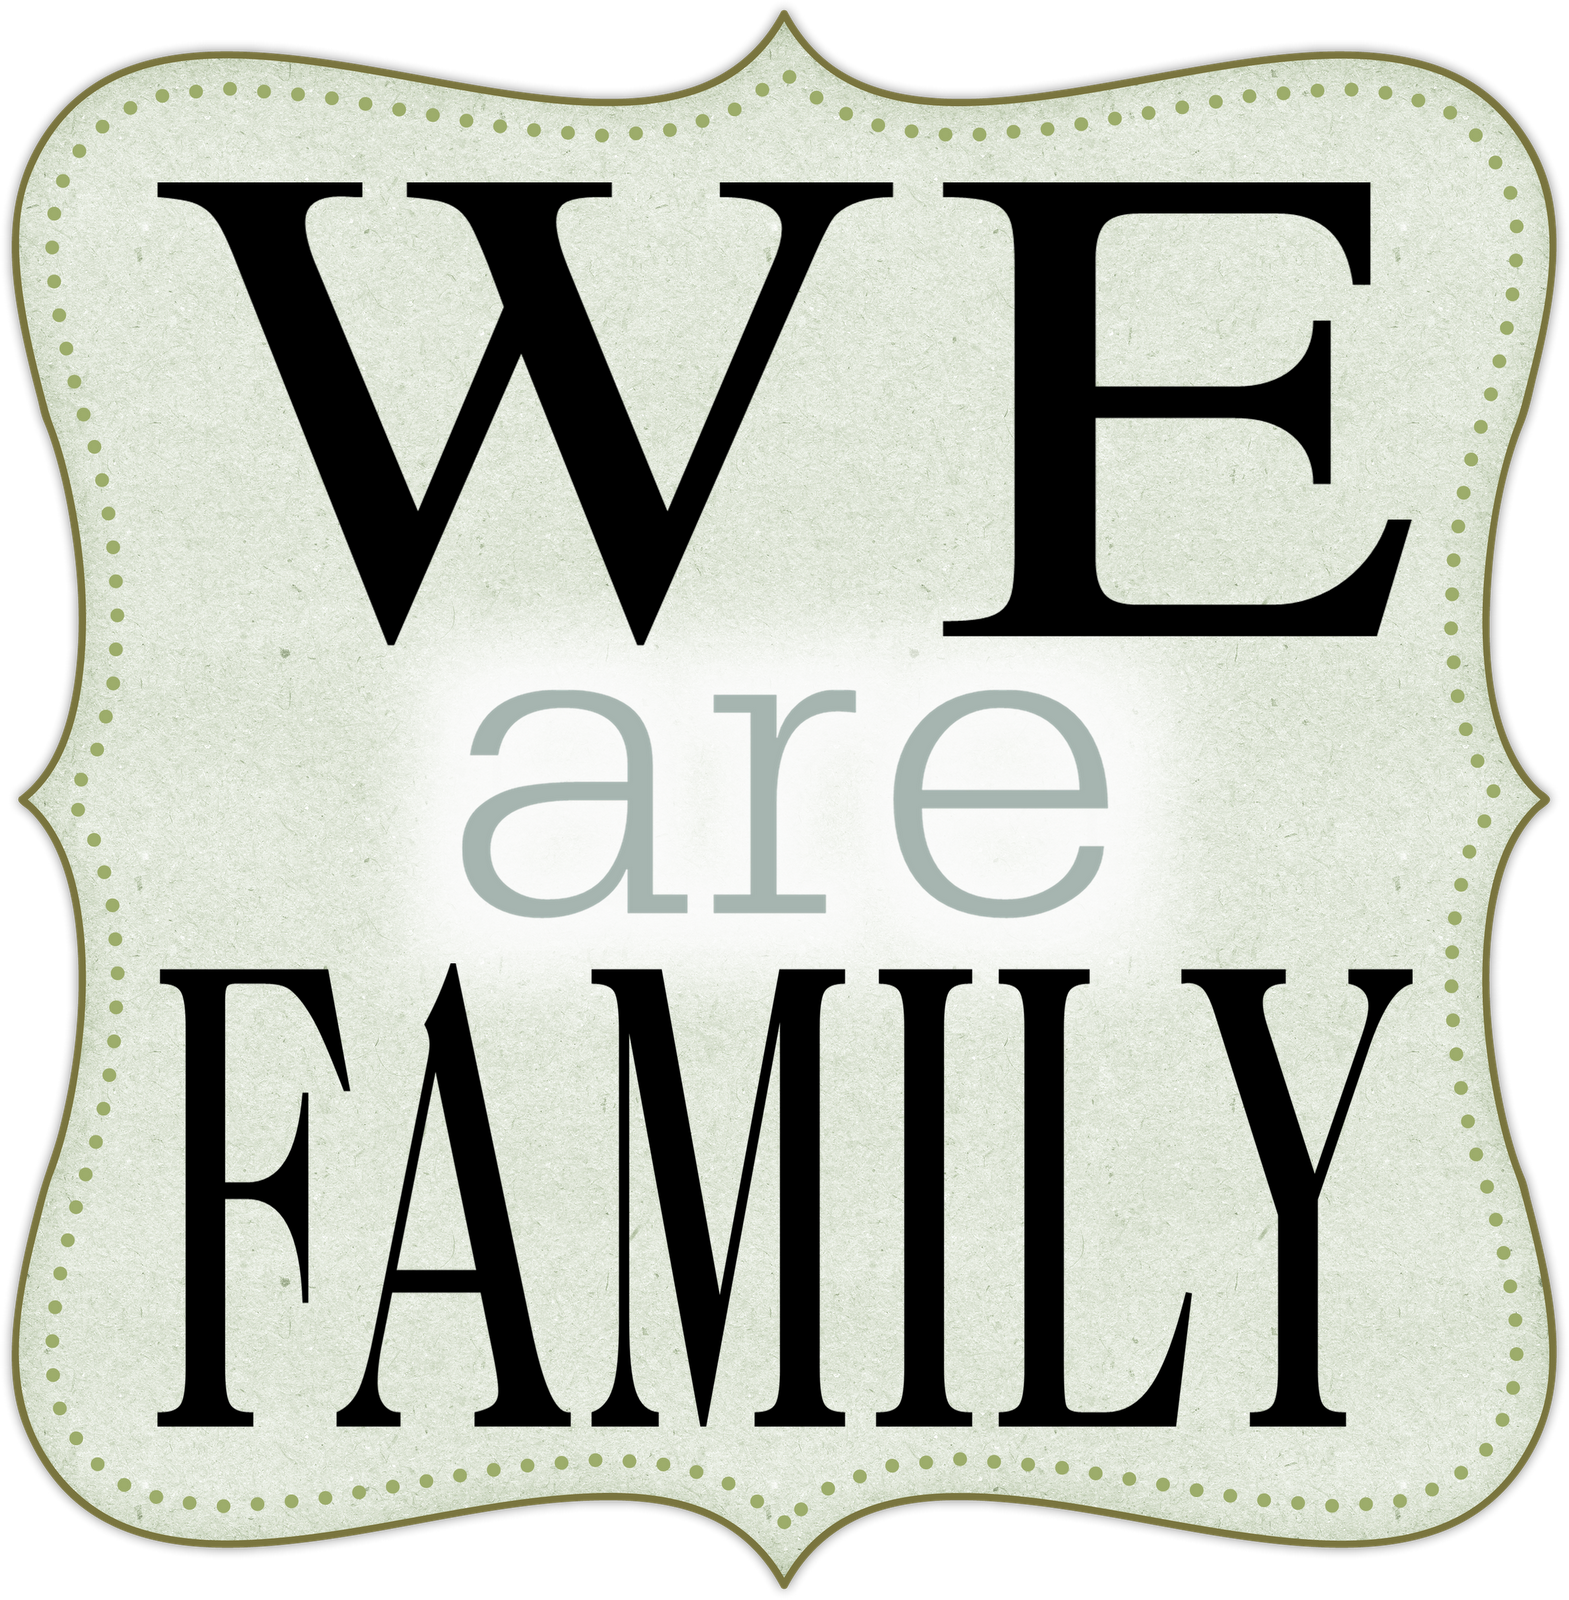 We Are Family Clipart